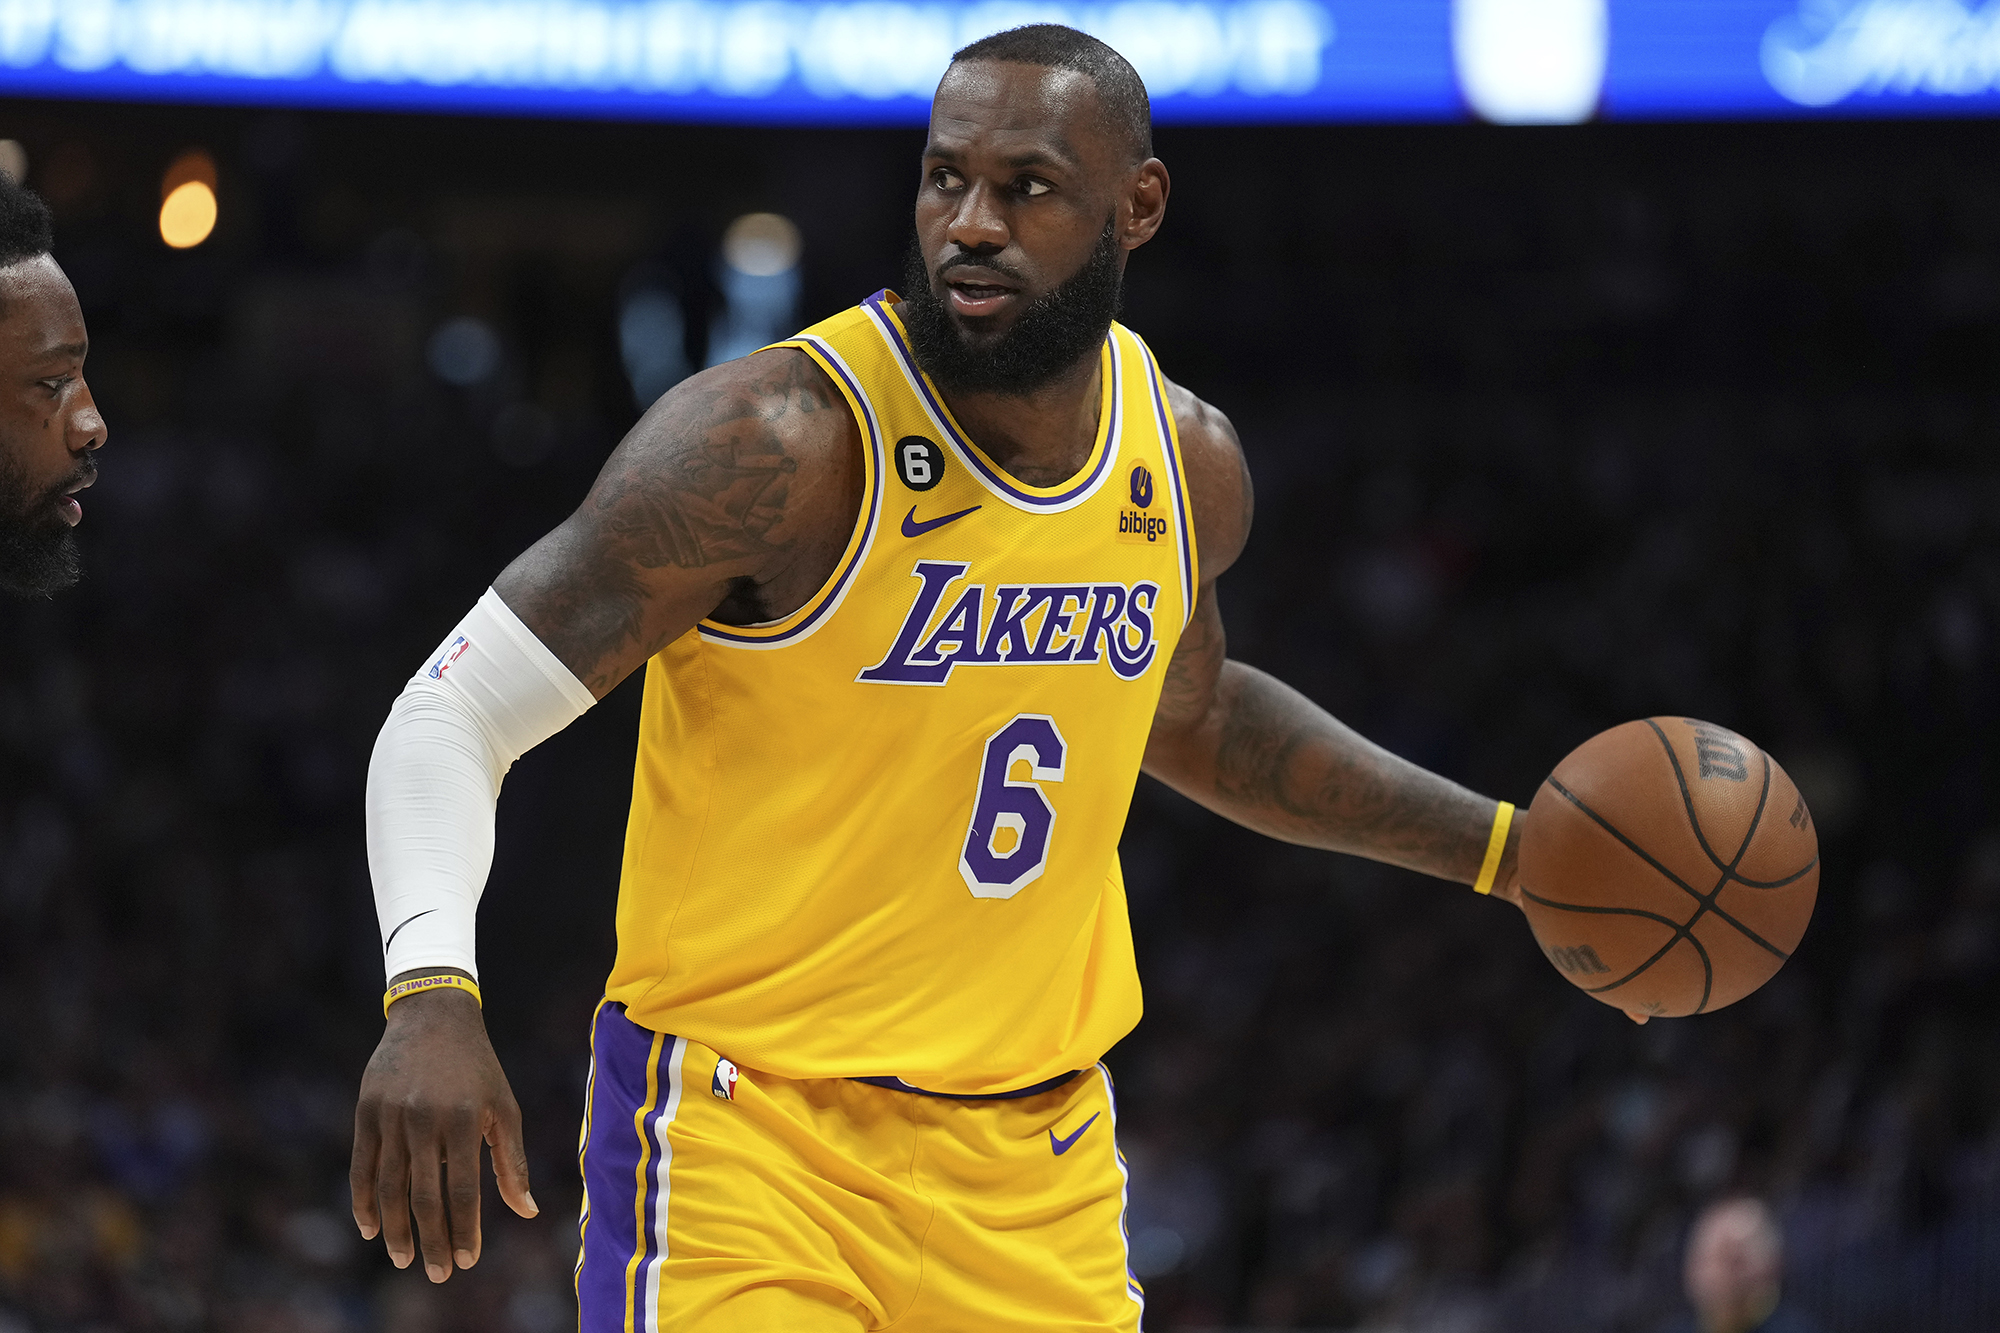 Was LeBron James' tendon injury the reason for Lakers' playoff downfall?